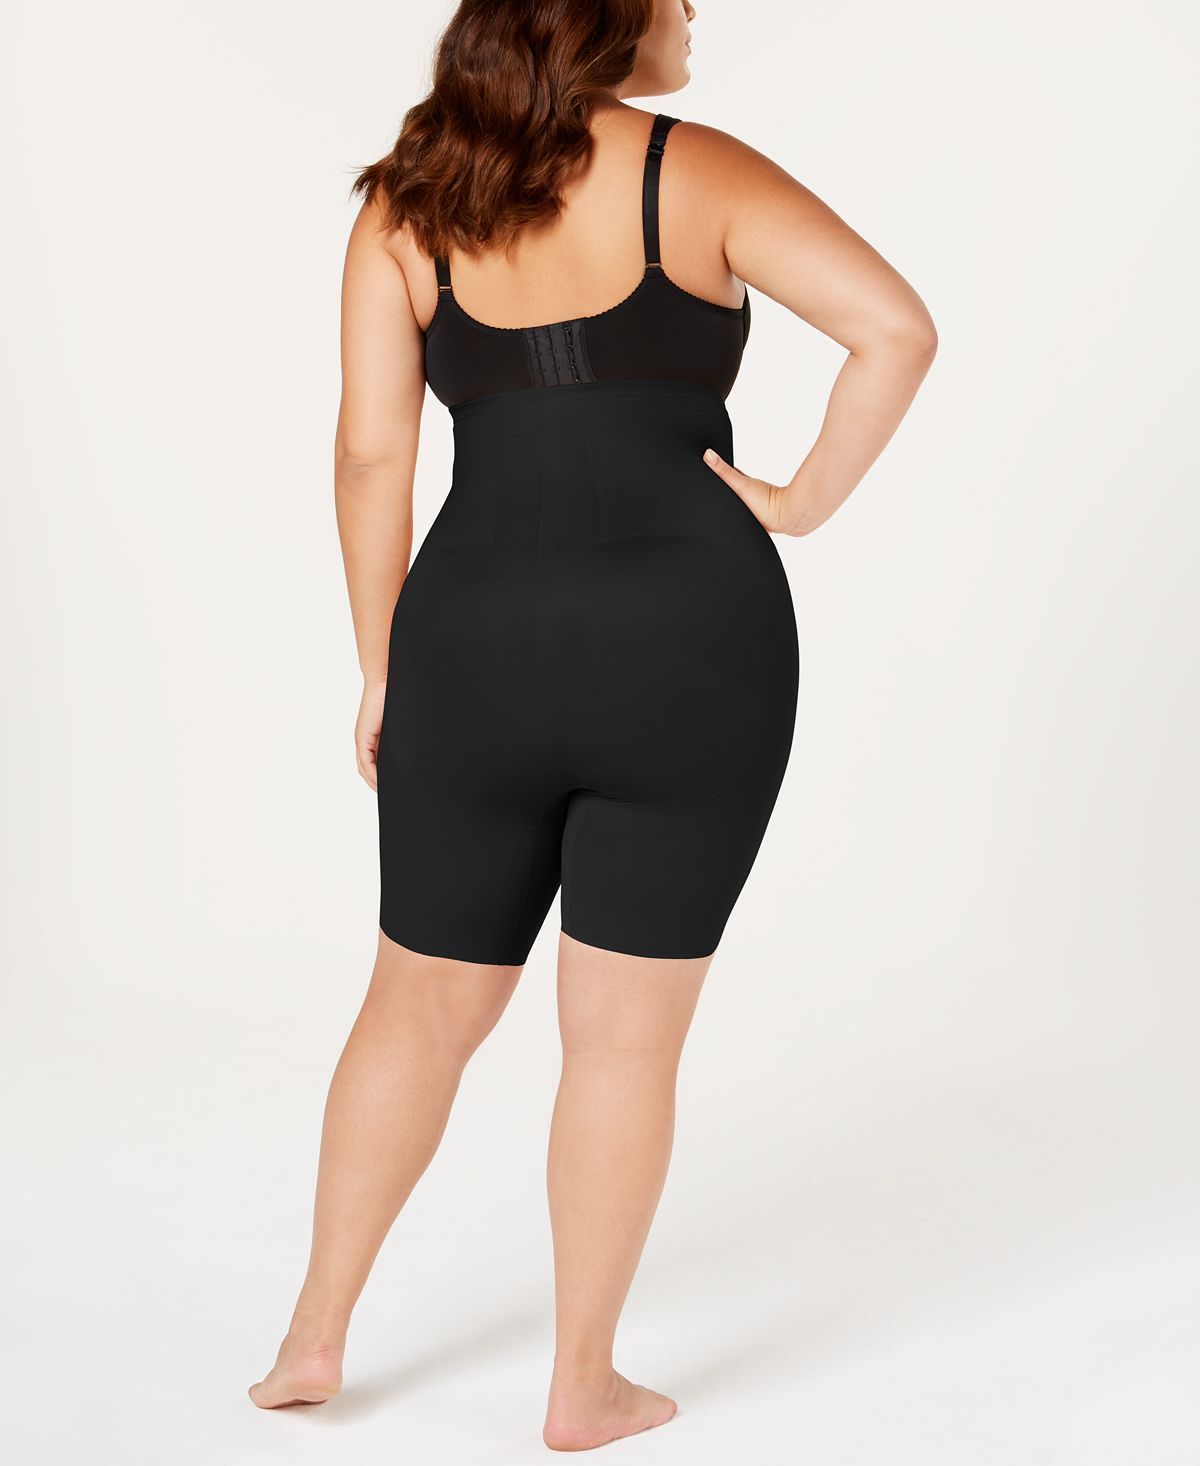 Miraclesuit Wo Plus Extra Firm Flexible-fit High Waist Thigh Slimmer 2939 Black